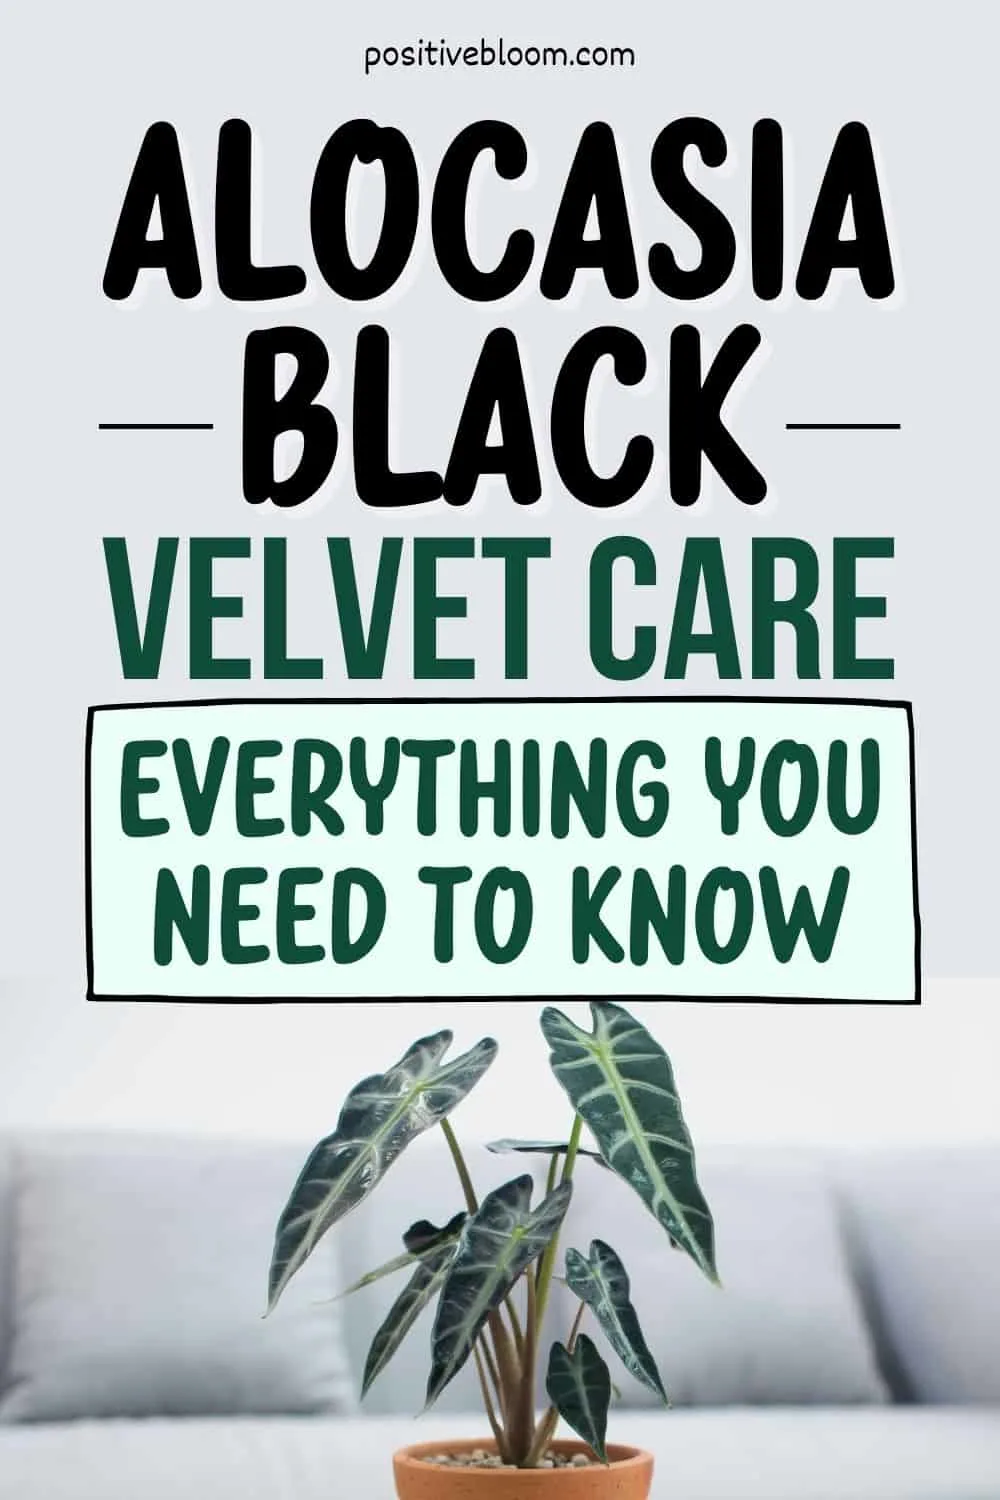 Alocasia Black Velvet Care Everything You Need To Know Pinterest